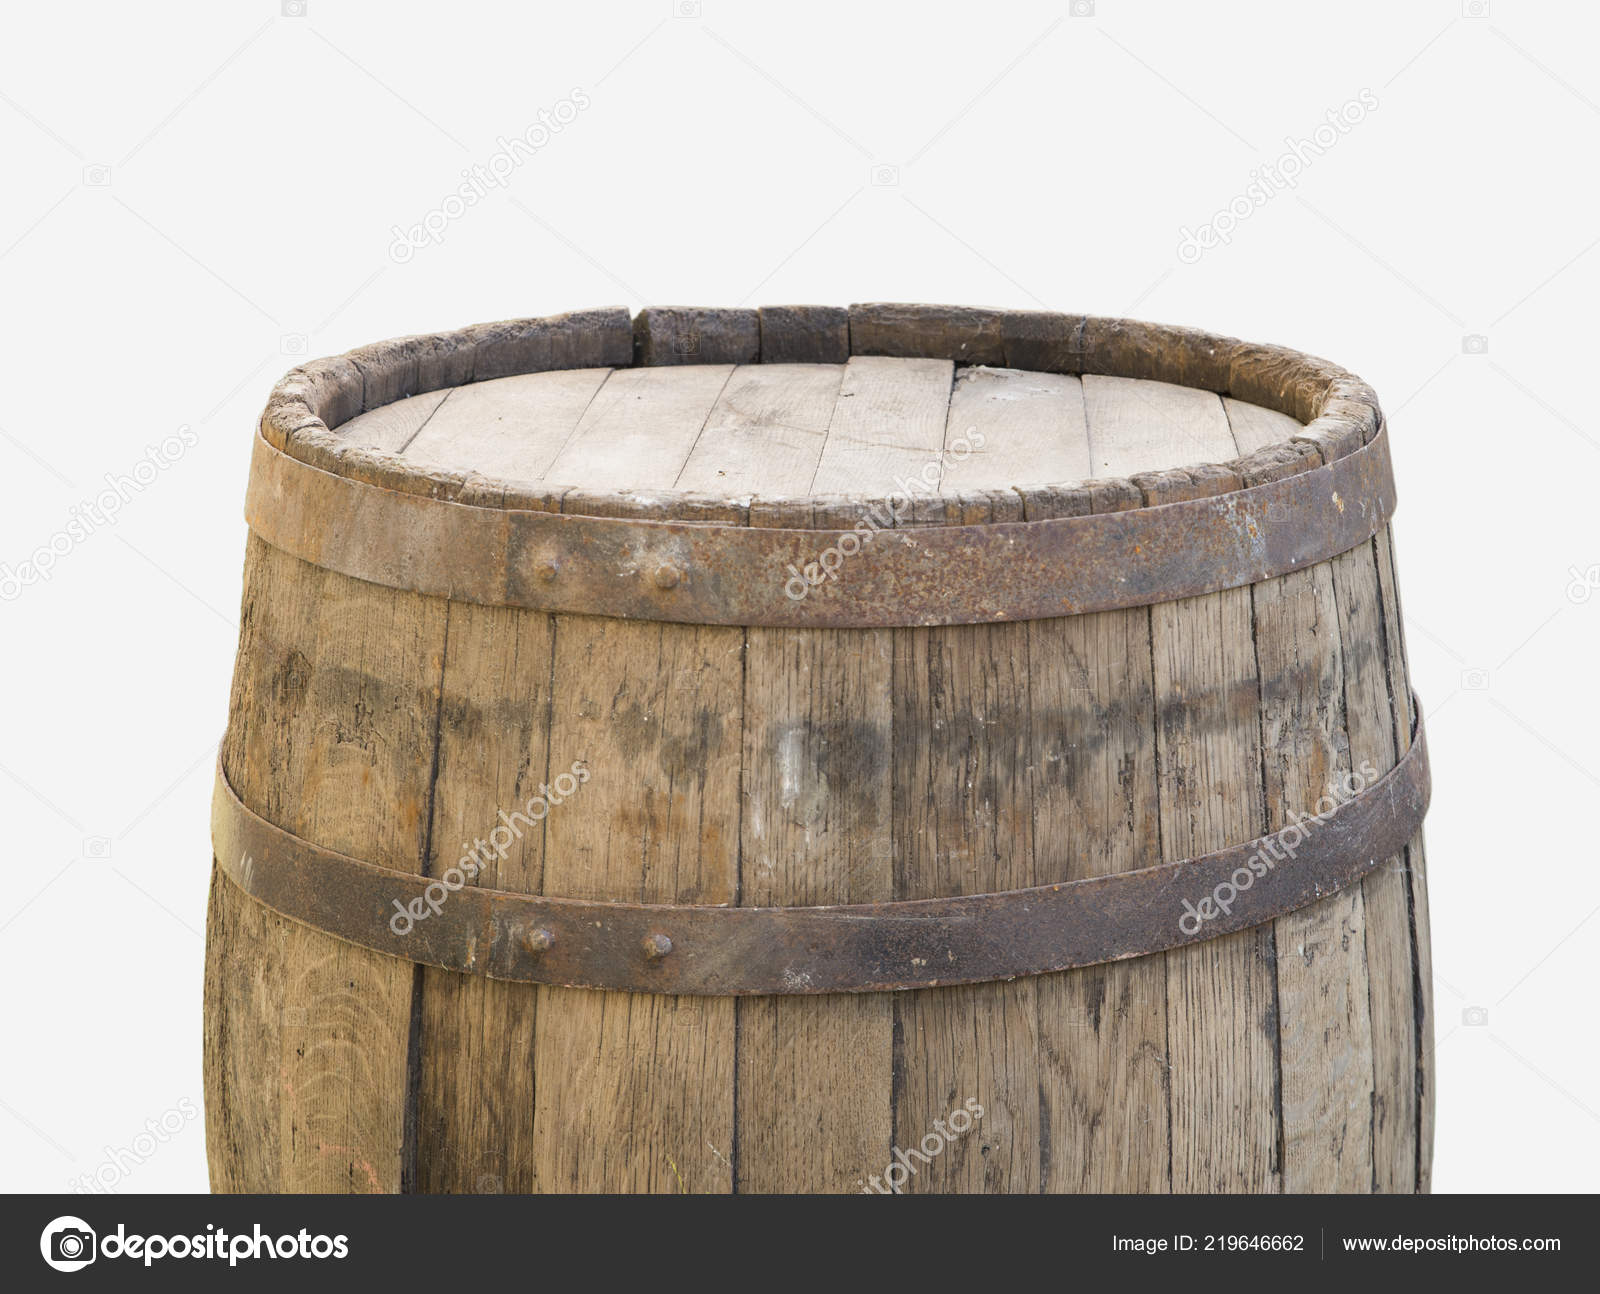 Wooden Barrel Top View Isolated White Background Illustration Stock Photo  by ©kishivan 219646662